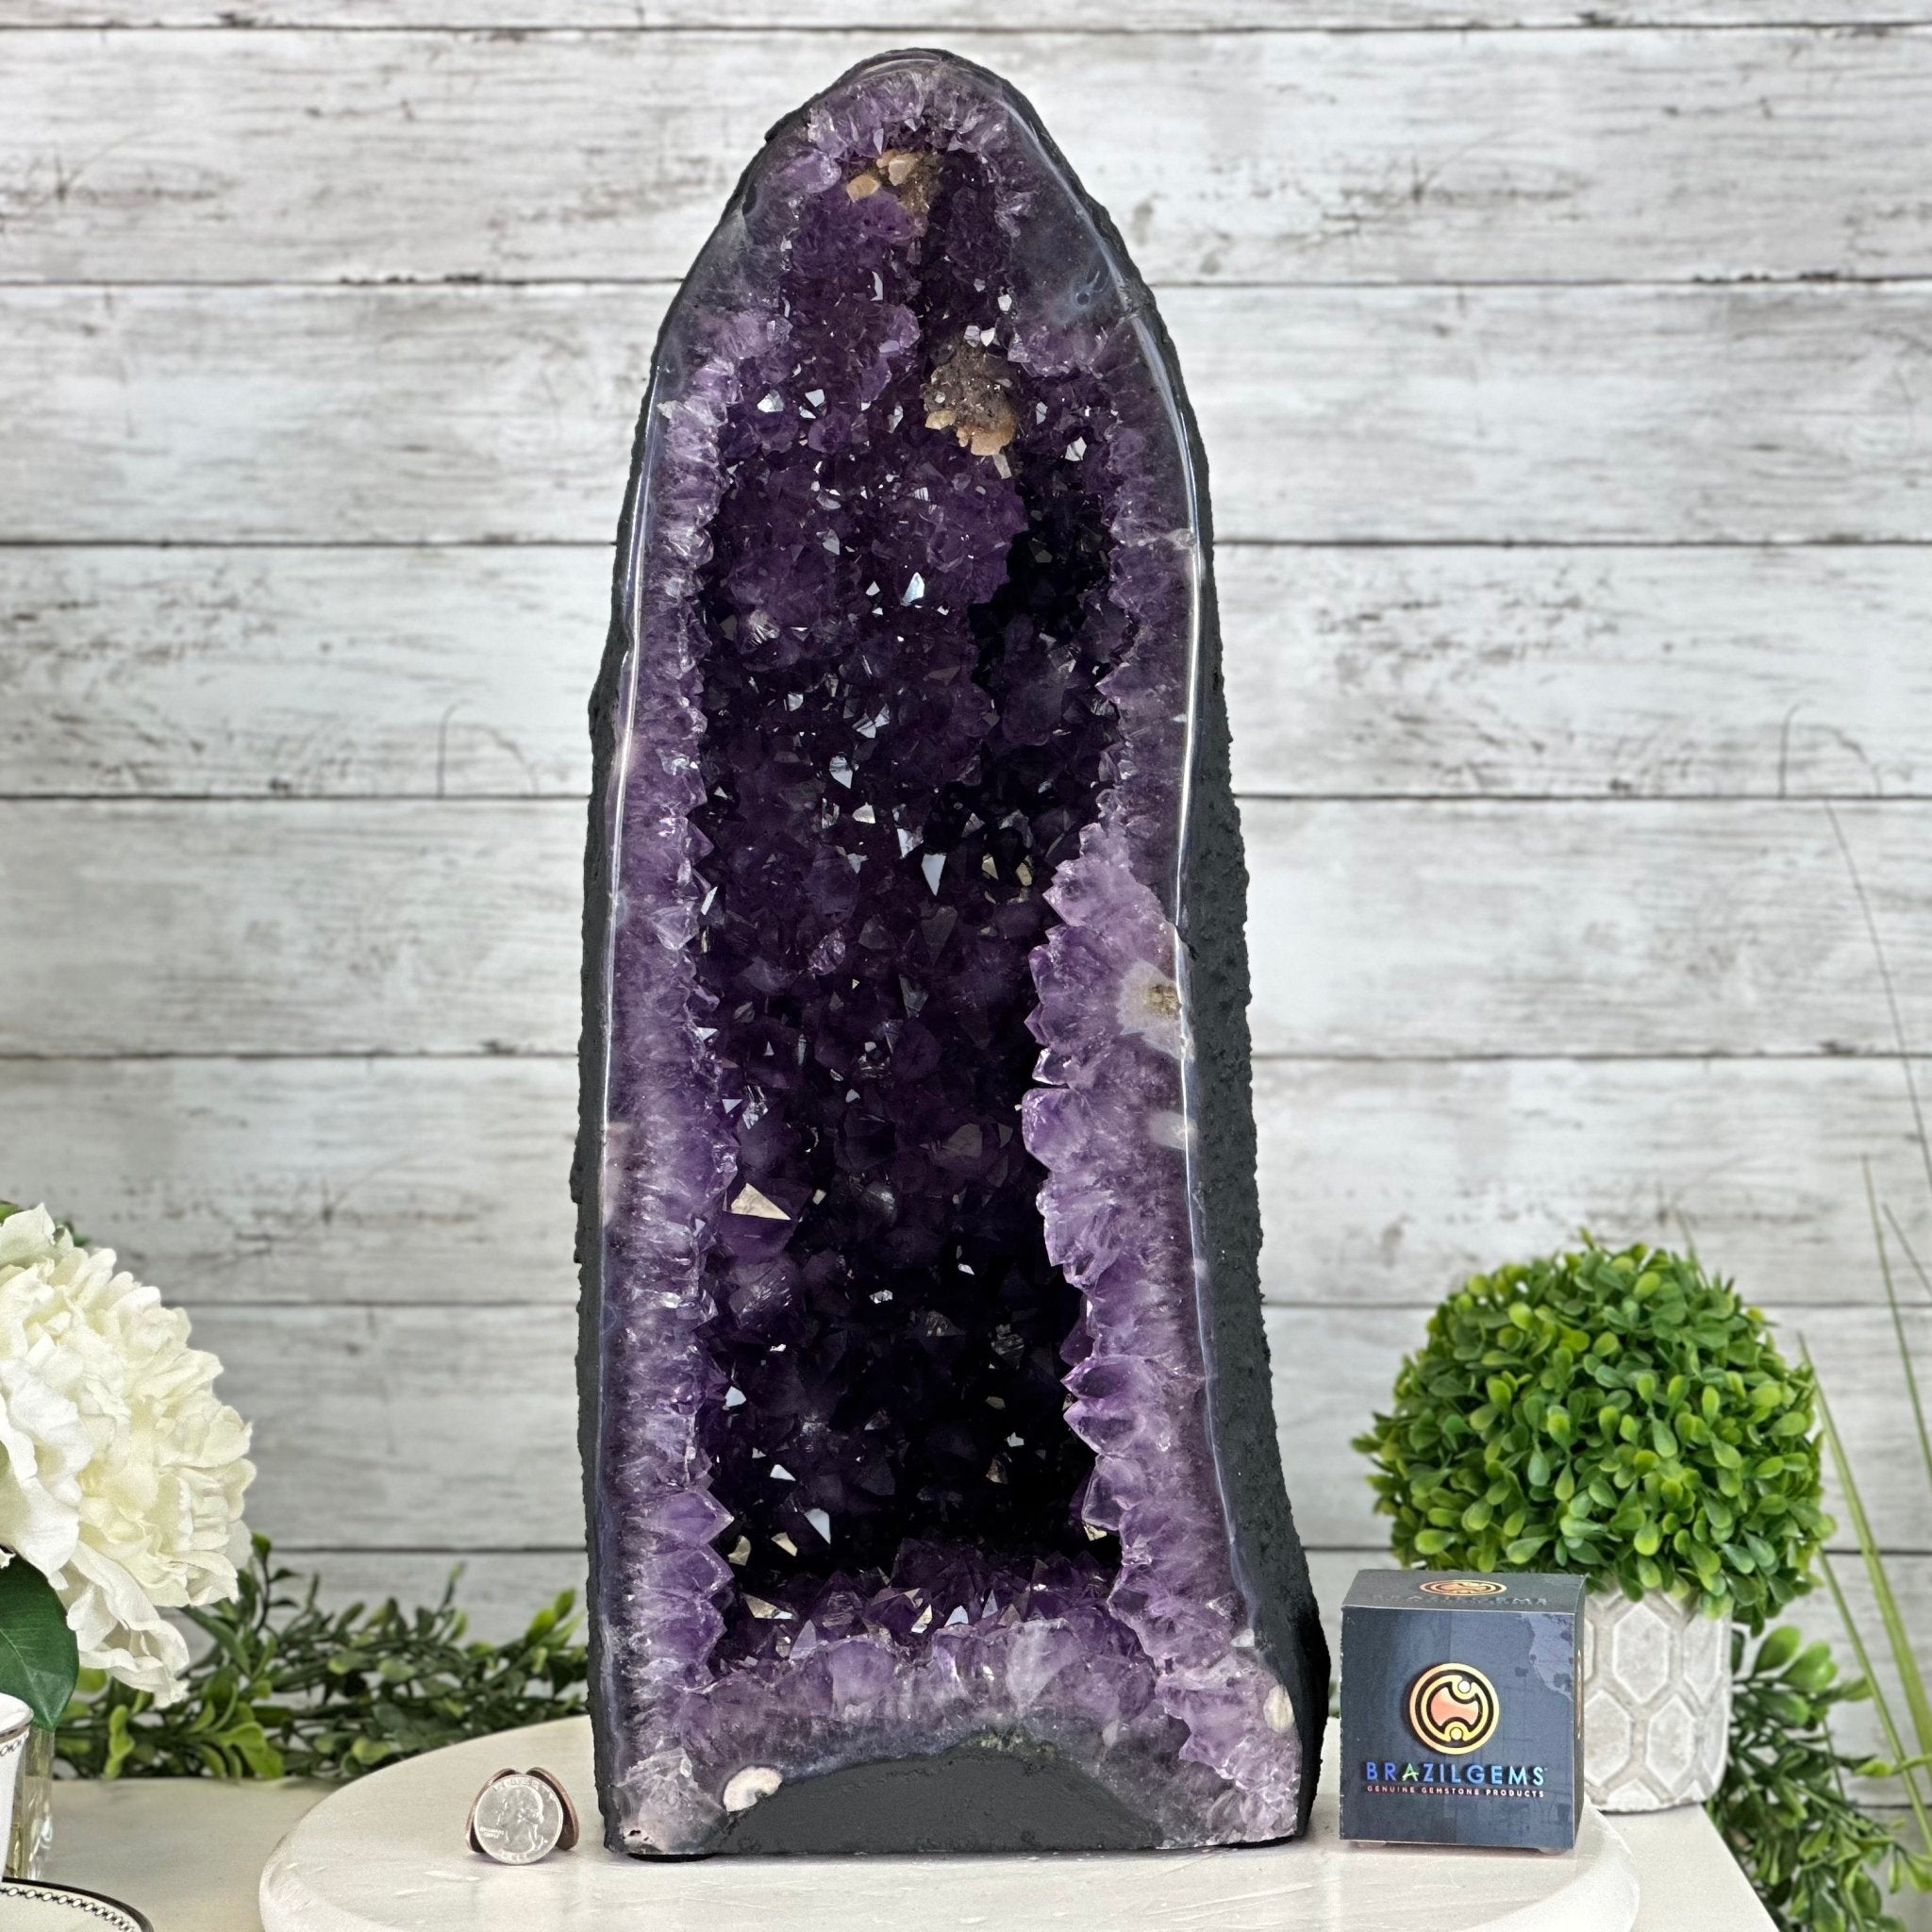 Quality Brazilian Amethyst Cathedral, 32.1 lbs & 19.4" Tall, #5601 - 1408 - Brazil GemsBrazil GemsQuality Brazilian Amethyst Cathedral, 32.1 lbs & 19.4" Tall, #5601 - 1408Cathedrals5601 - 1408